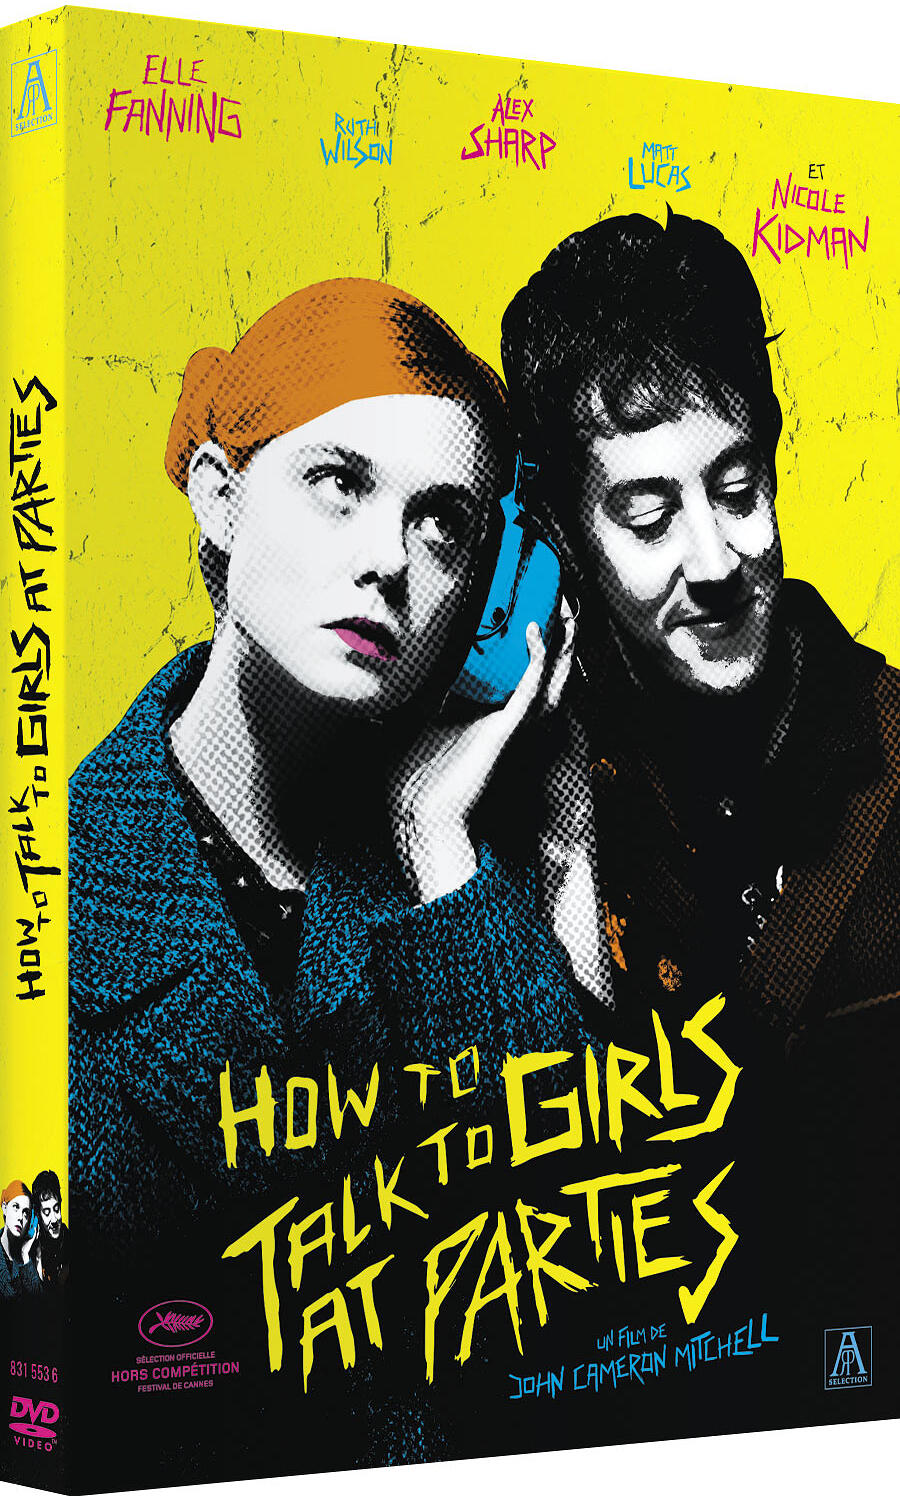 Couverture de : How to talk to girls at parties